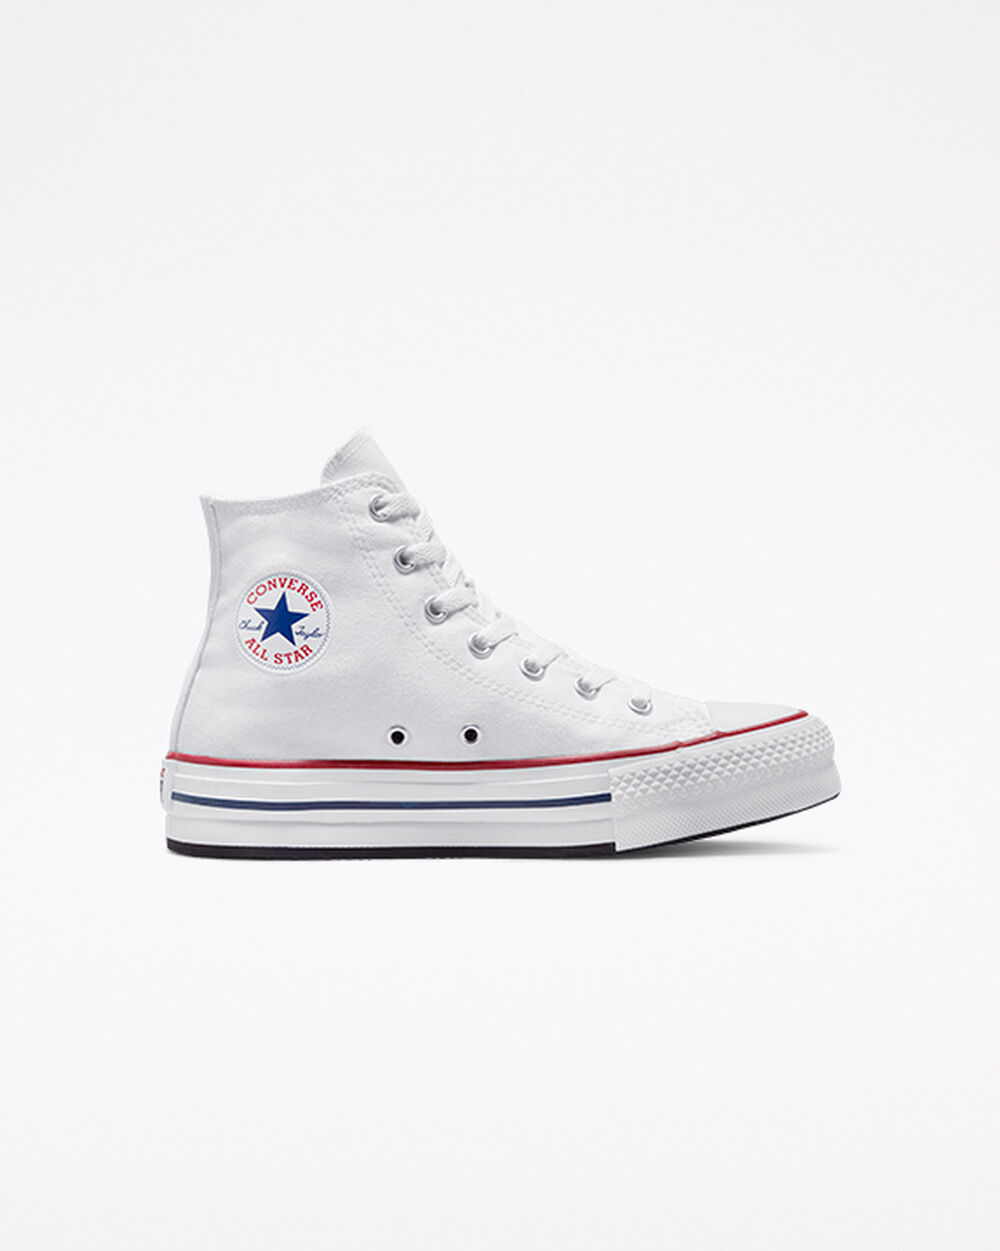 Converse Girl Chuck Taylor All Star Best Price 